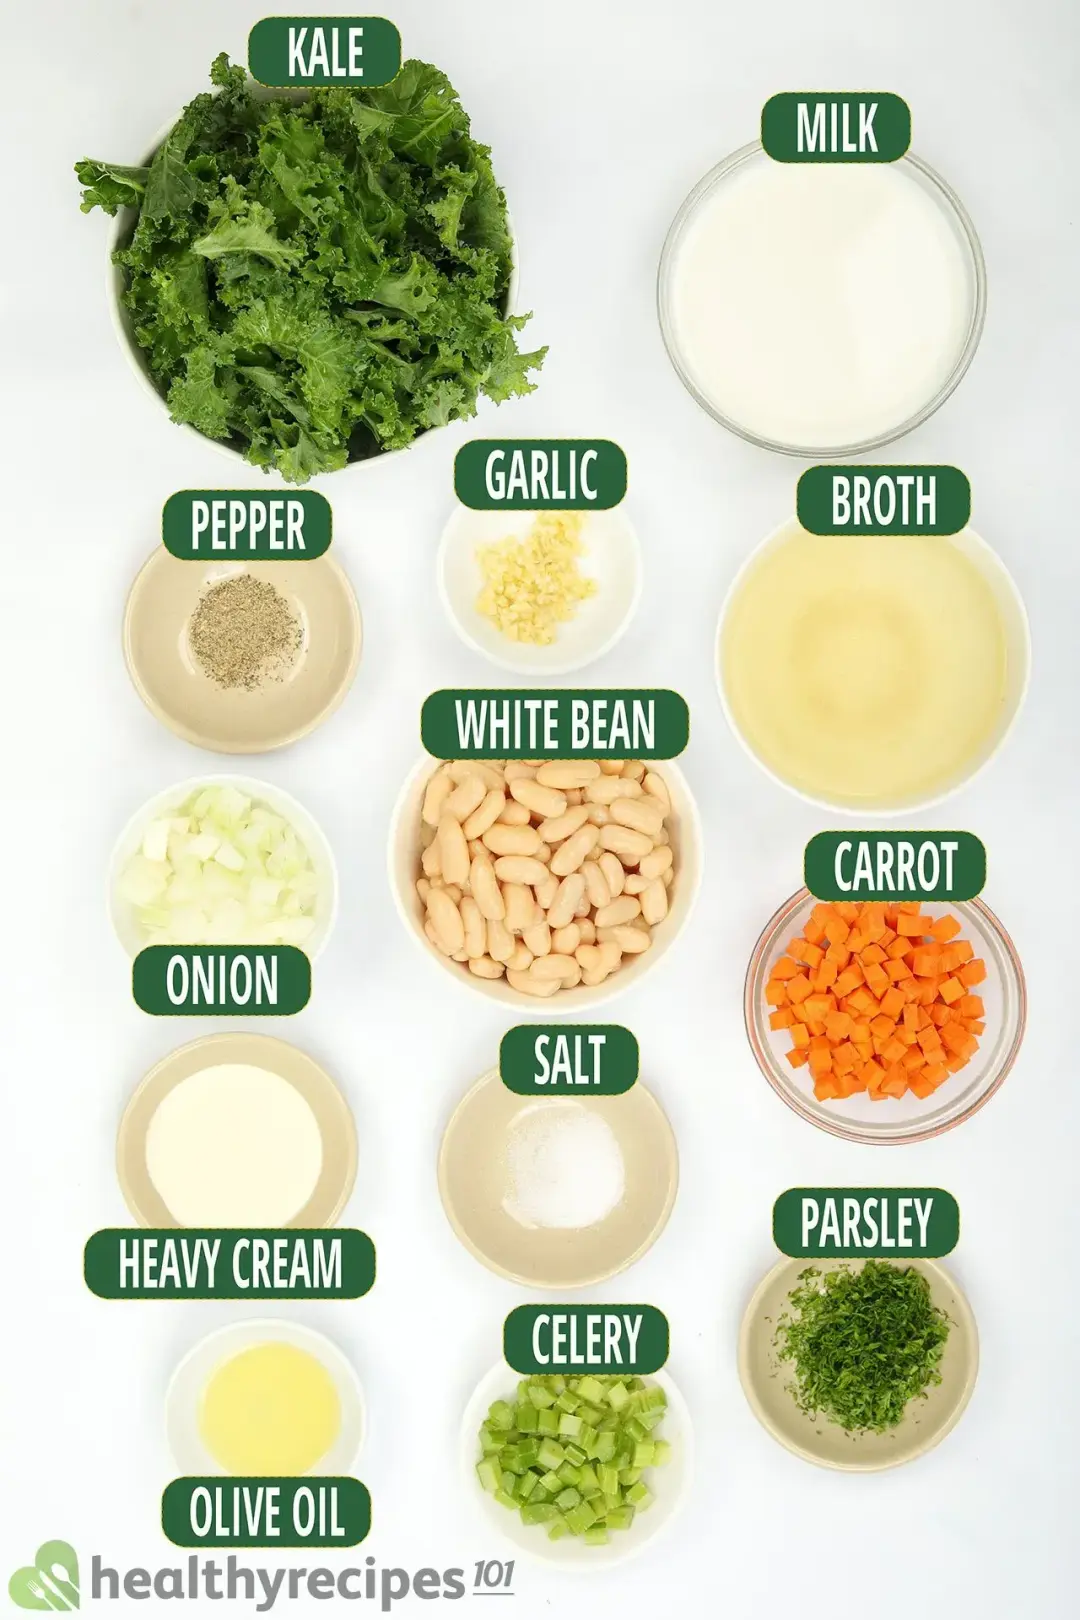 inredients for This White Bean and Kale Soup